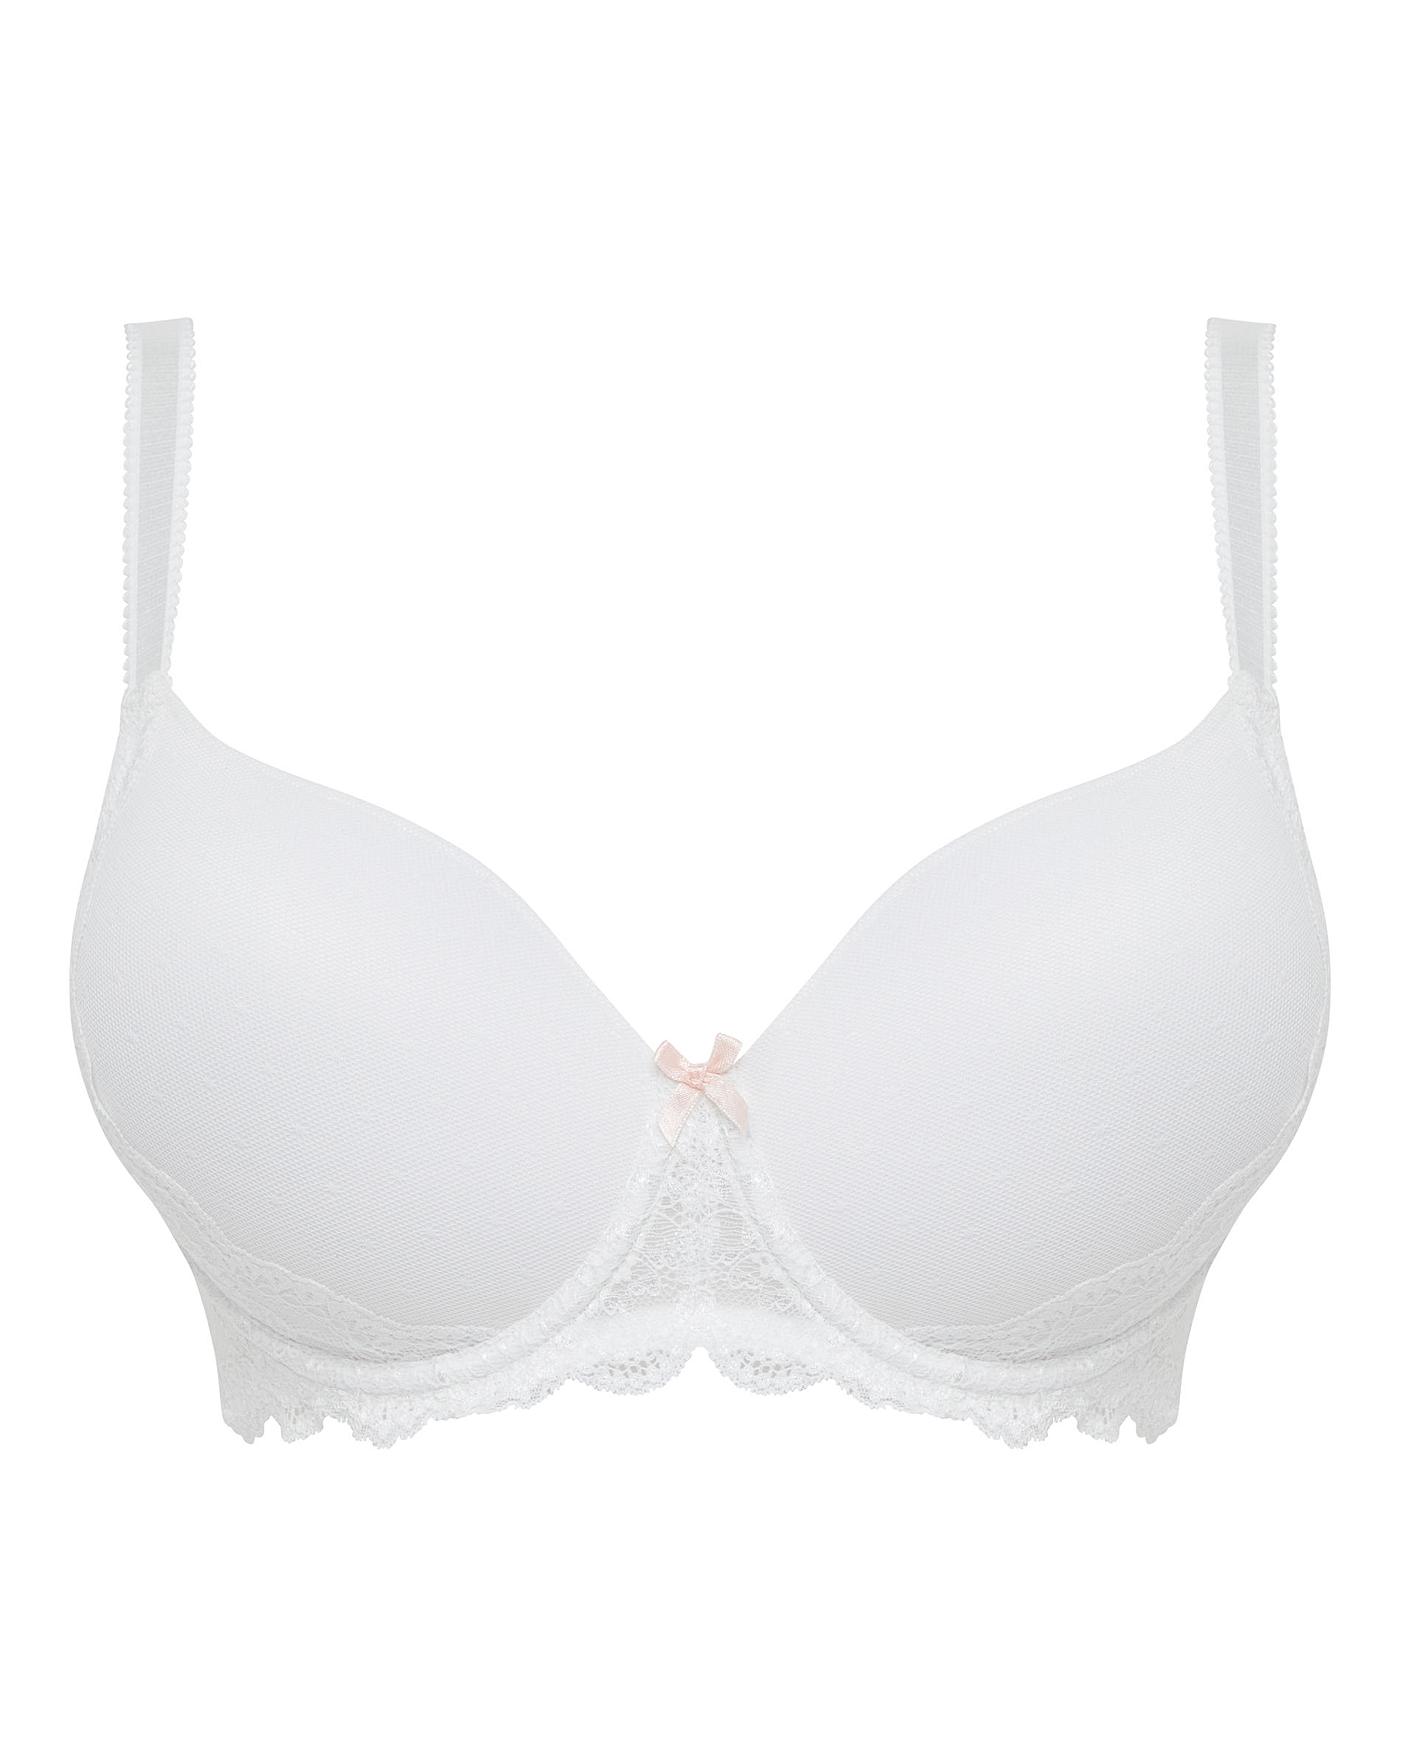 30C Figleaves Juliette Lace T-Shirt Bra 173509 Underwired Moulded - White -  Helia Beer Co